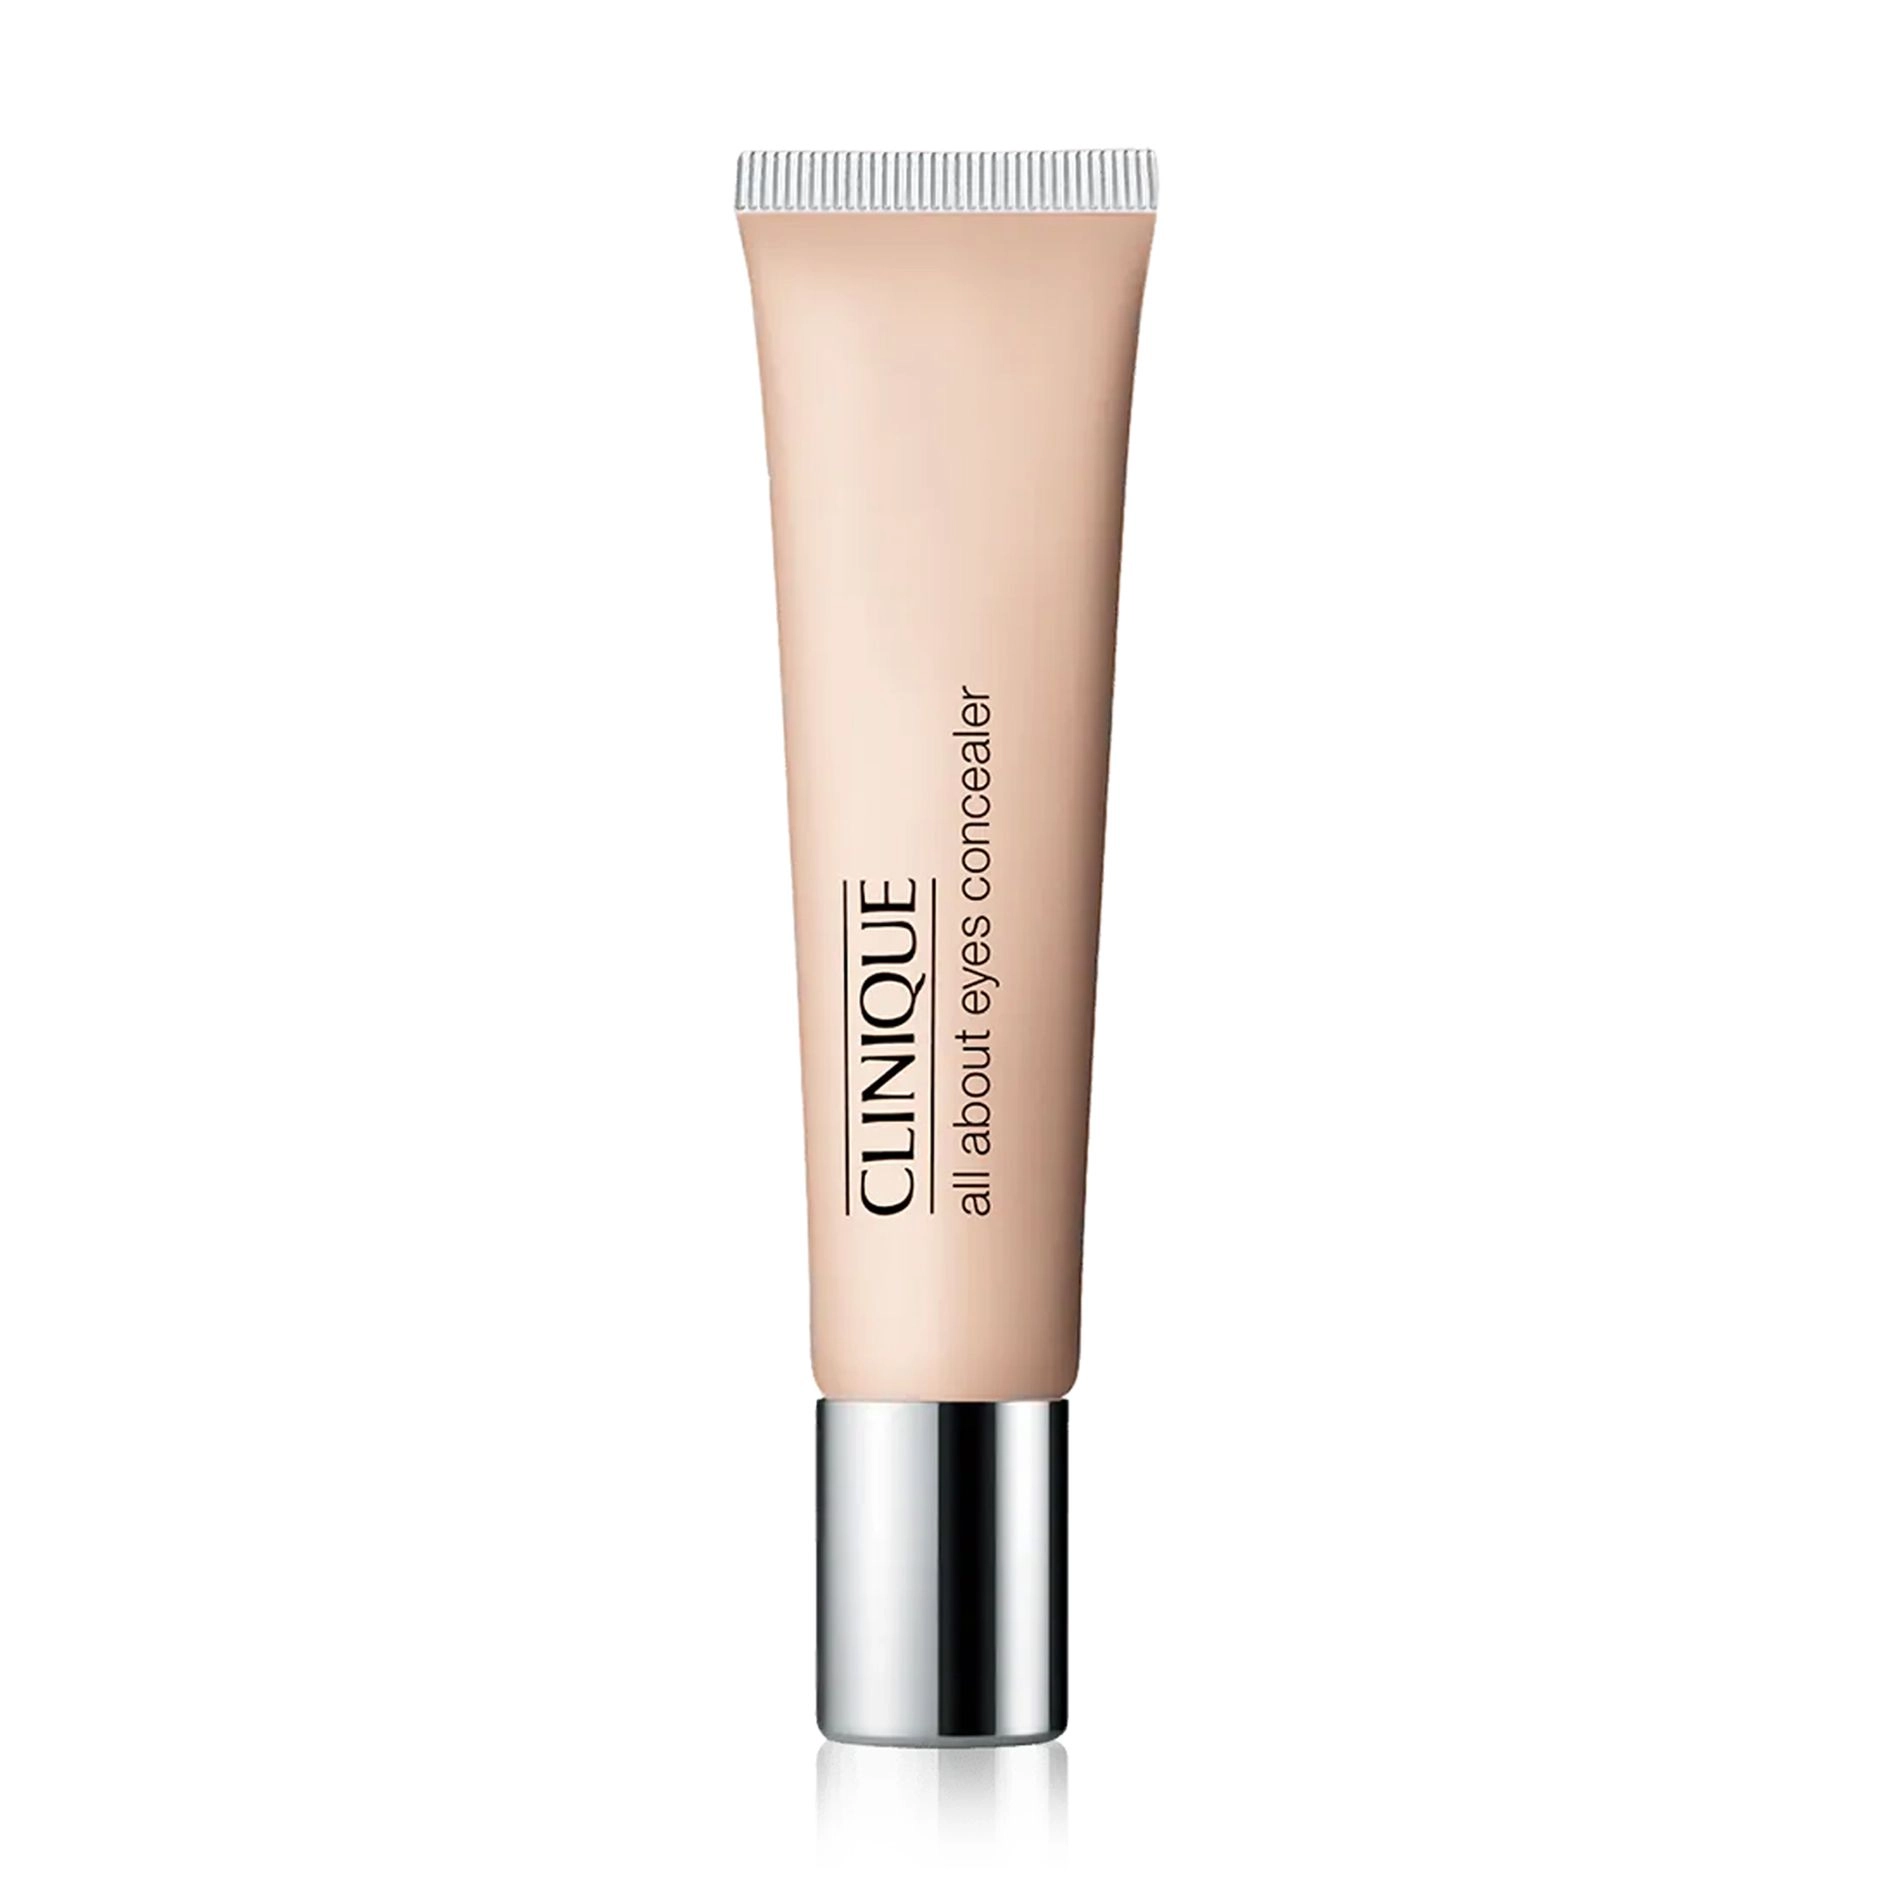 Clinique Консилер для кожи вокруг глаз All About Eyes Concealer 01 Light Neutral, 11 мл All About Eyes Concealer 03 Light Petal, 11 мл - фото N1